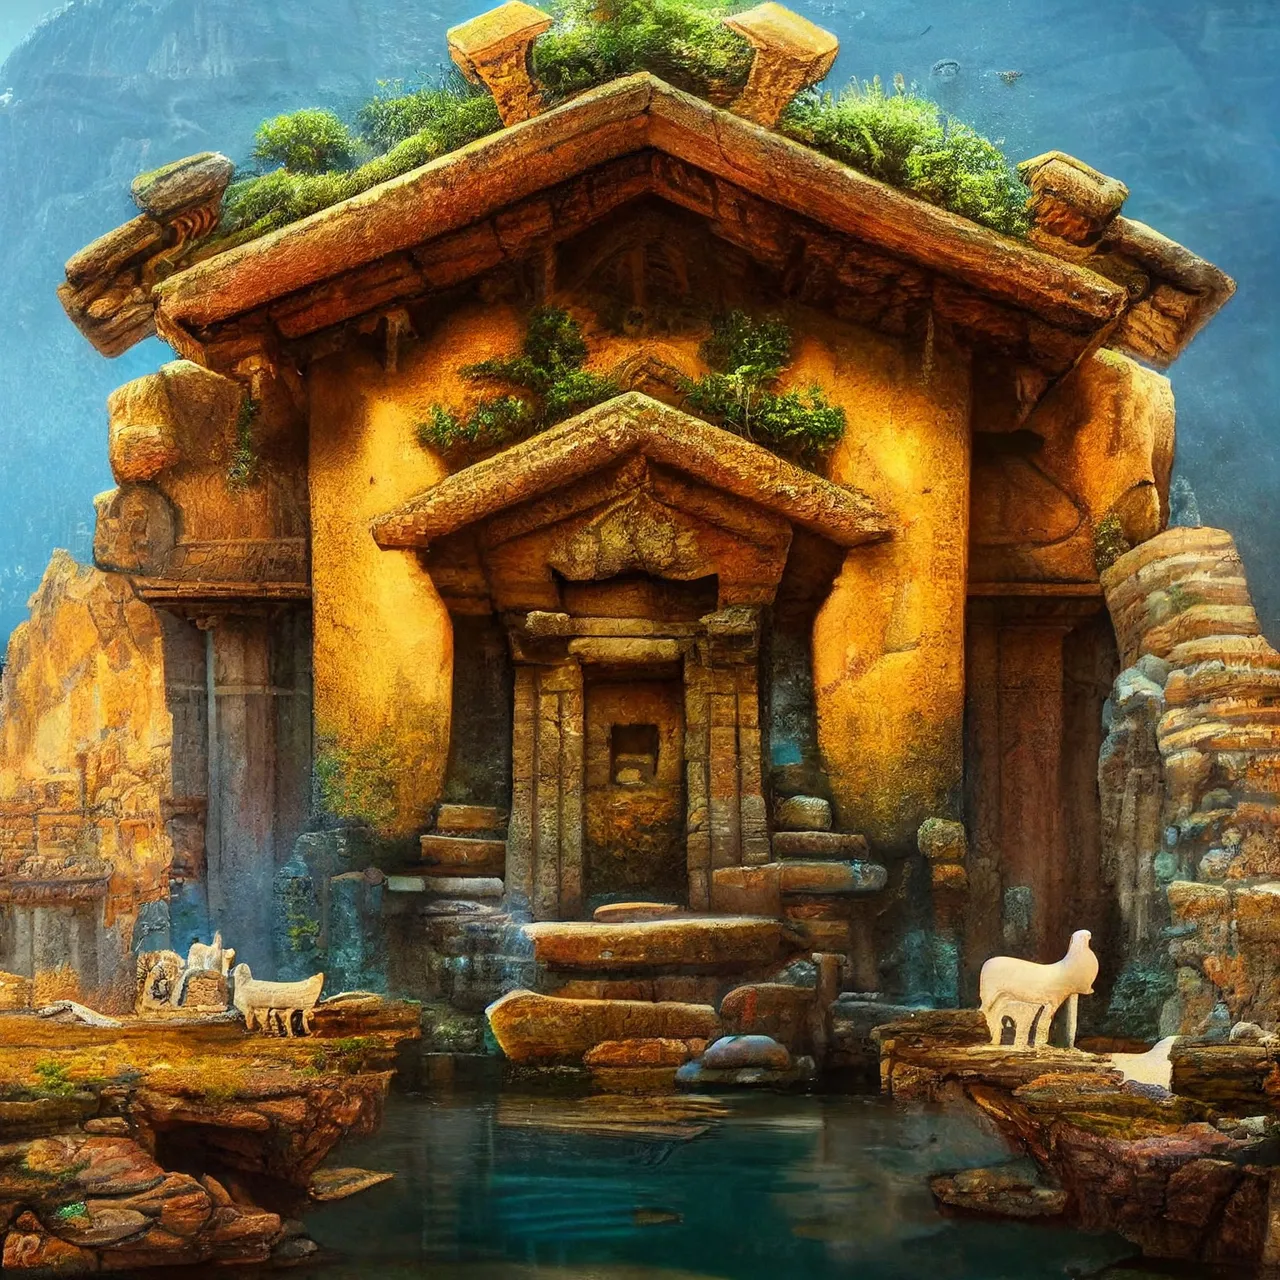 Ed_Privat_Ancient_temple_in_a_cliff_with_water_and_animals_drin_1d16d52e-edc7-49ed-b44a-89d4ef458f59.png